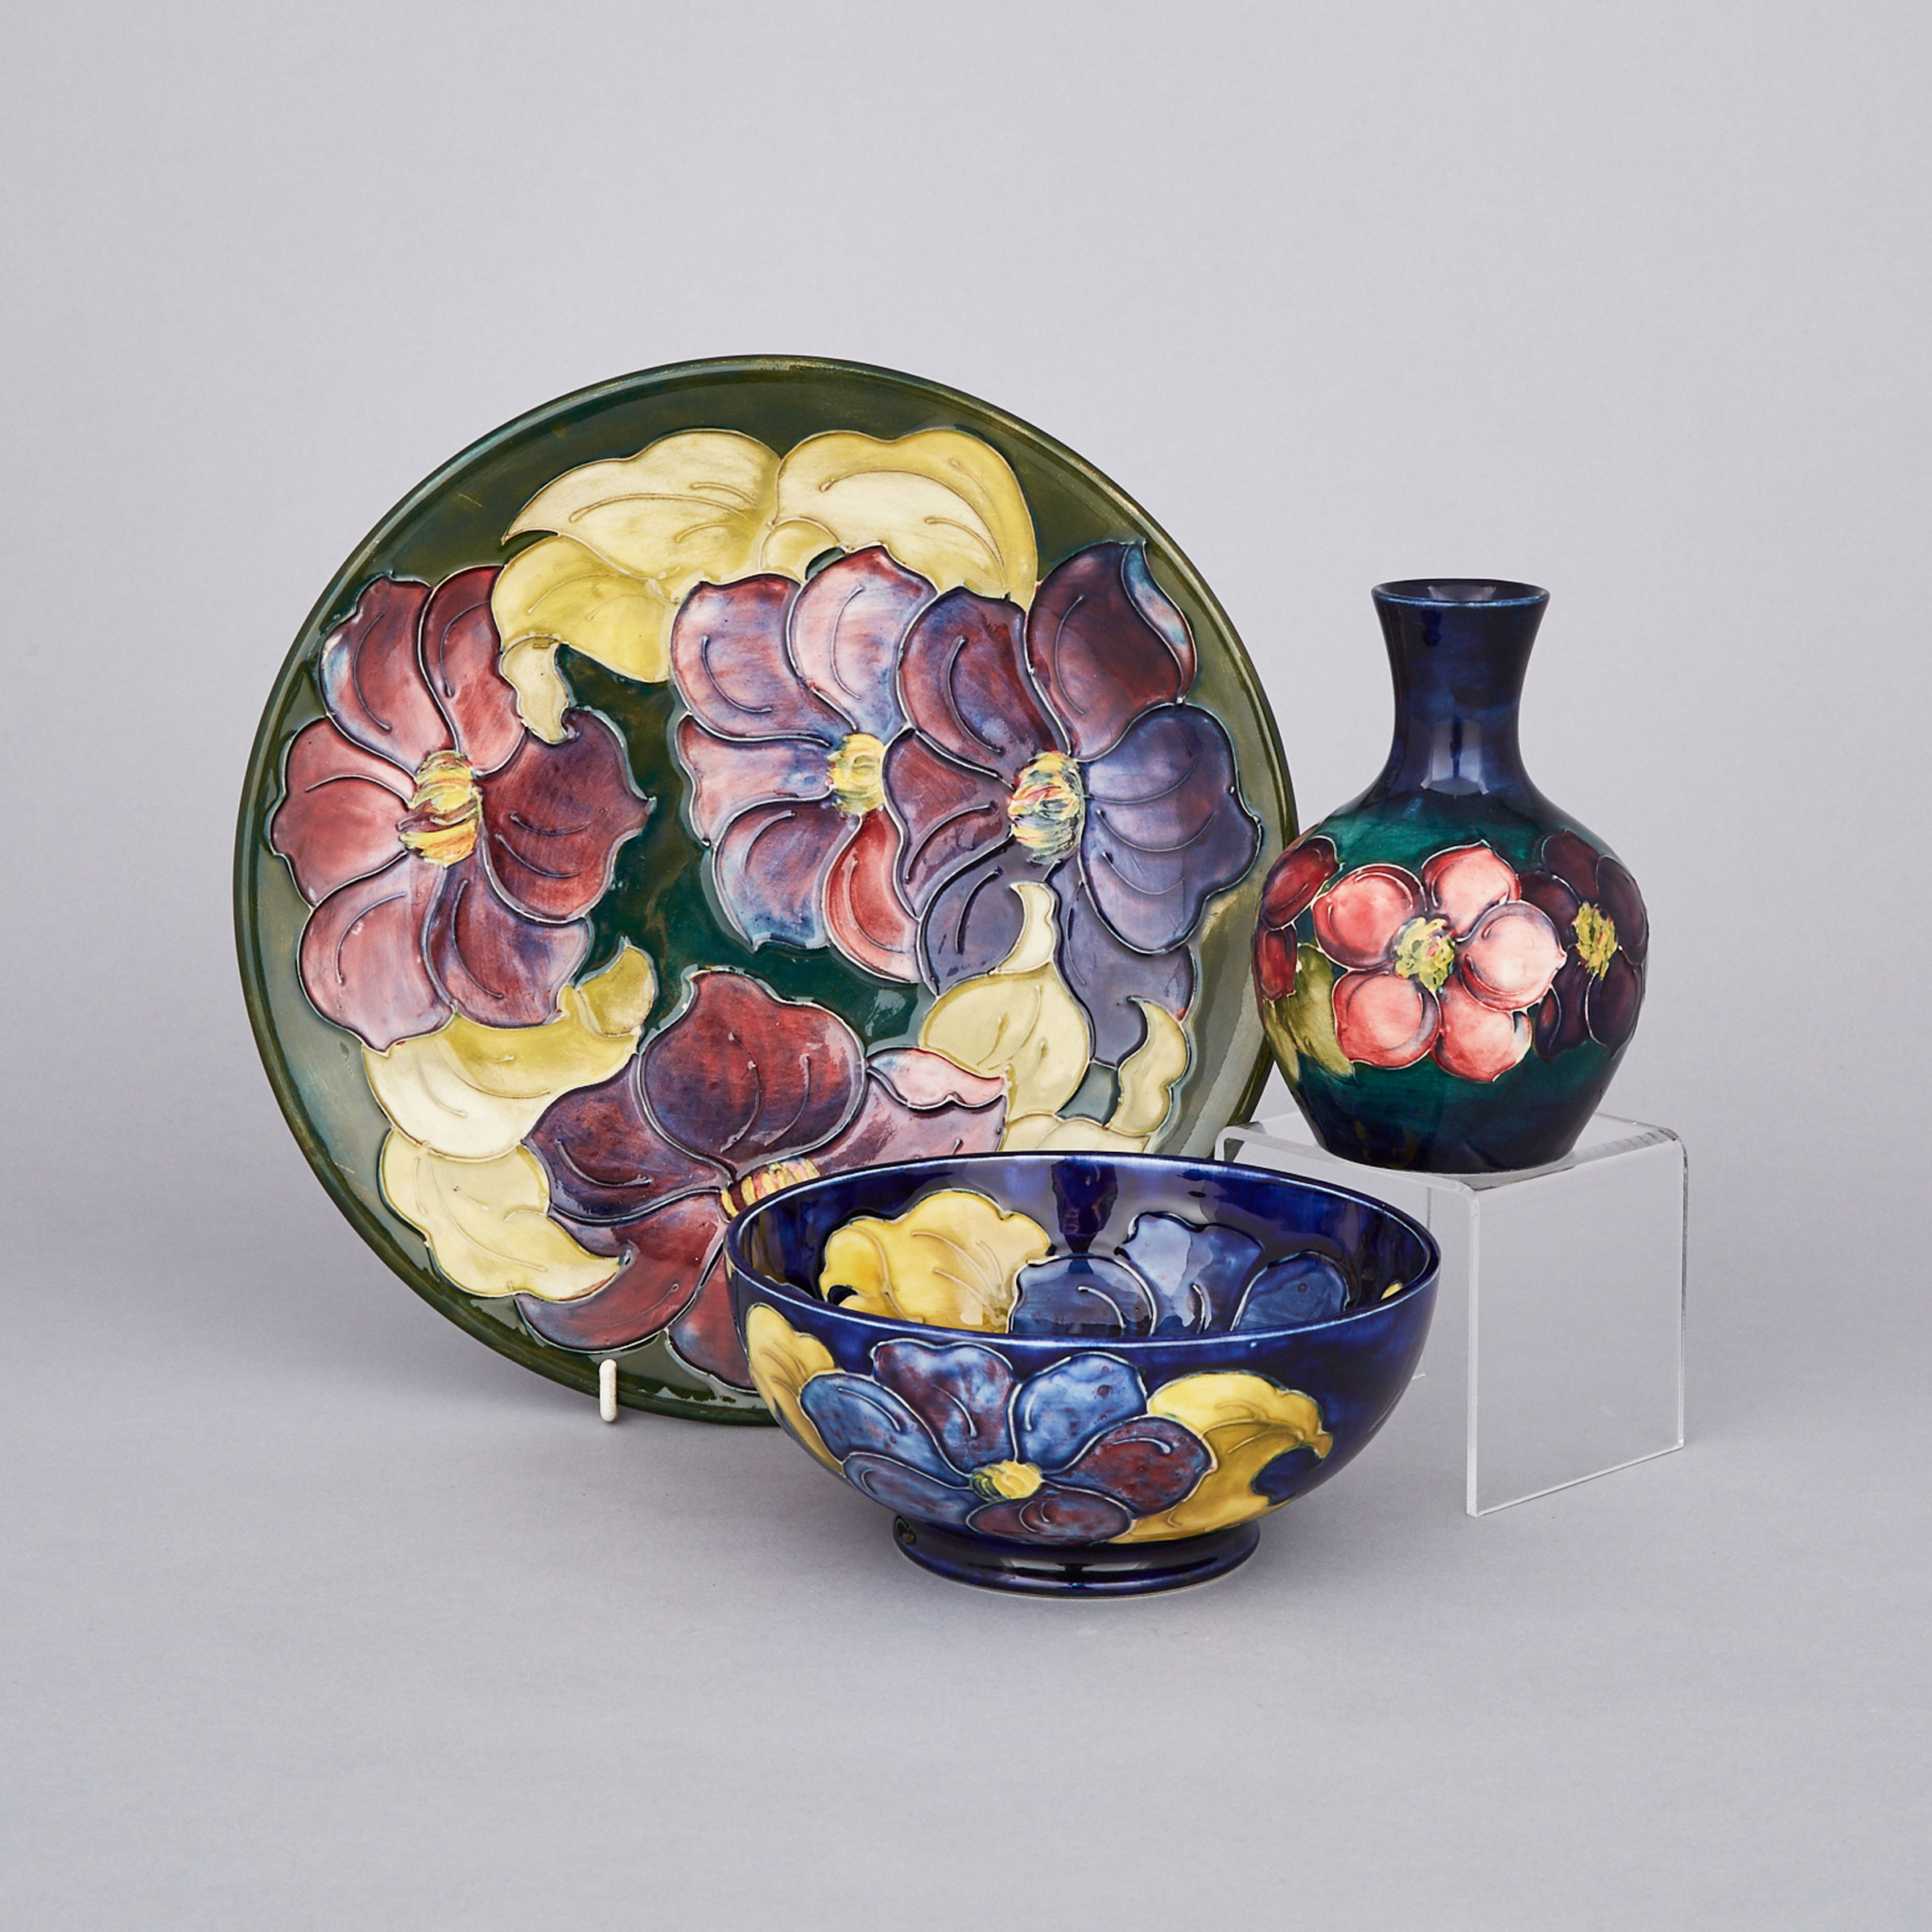 Moorcroft Clematis Bowl, Plate and Small Vase, c.1955-75